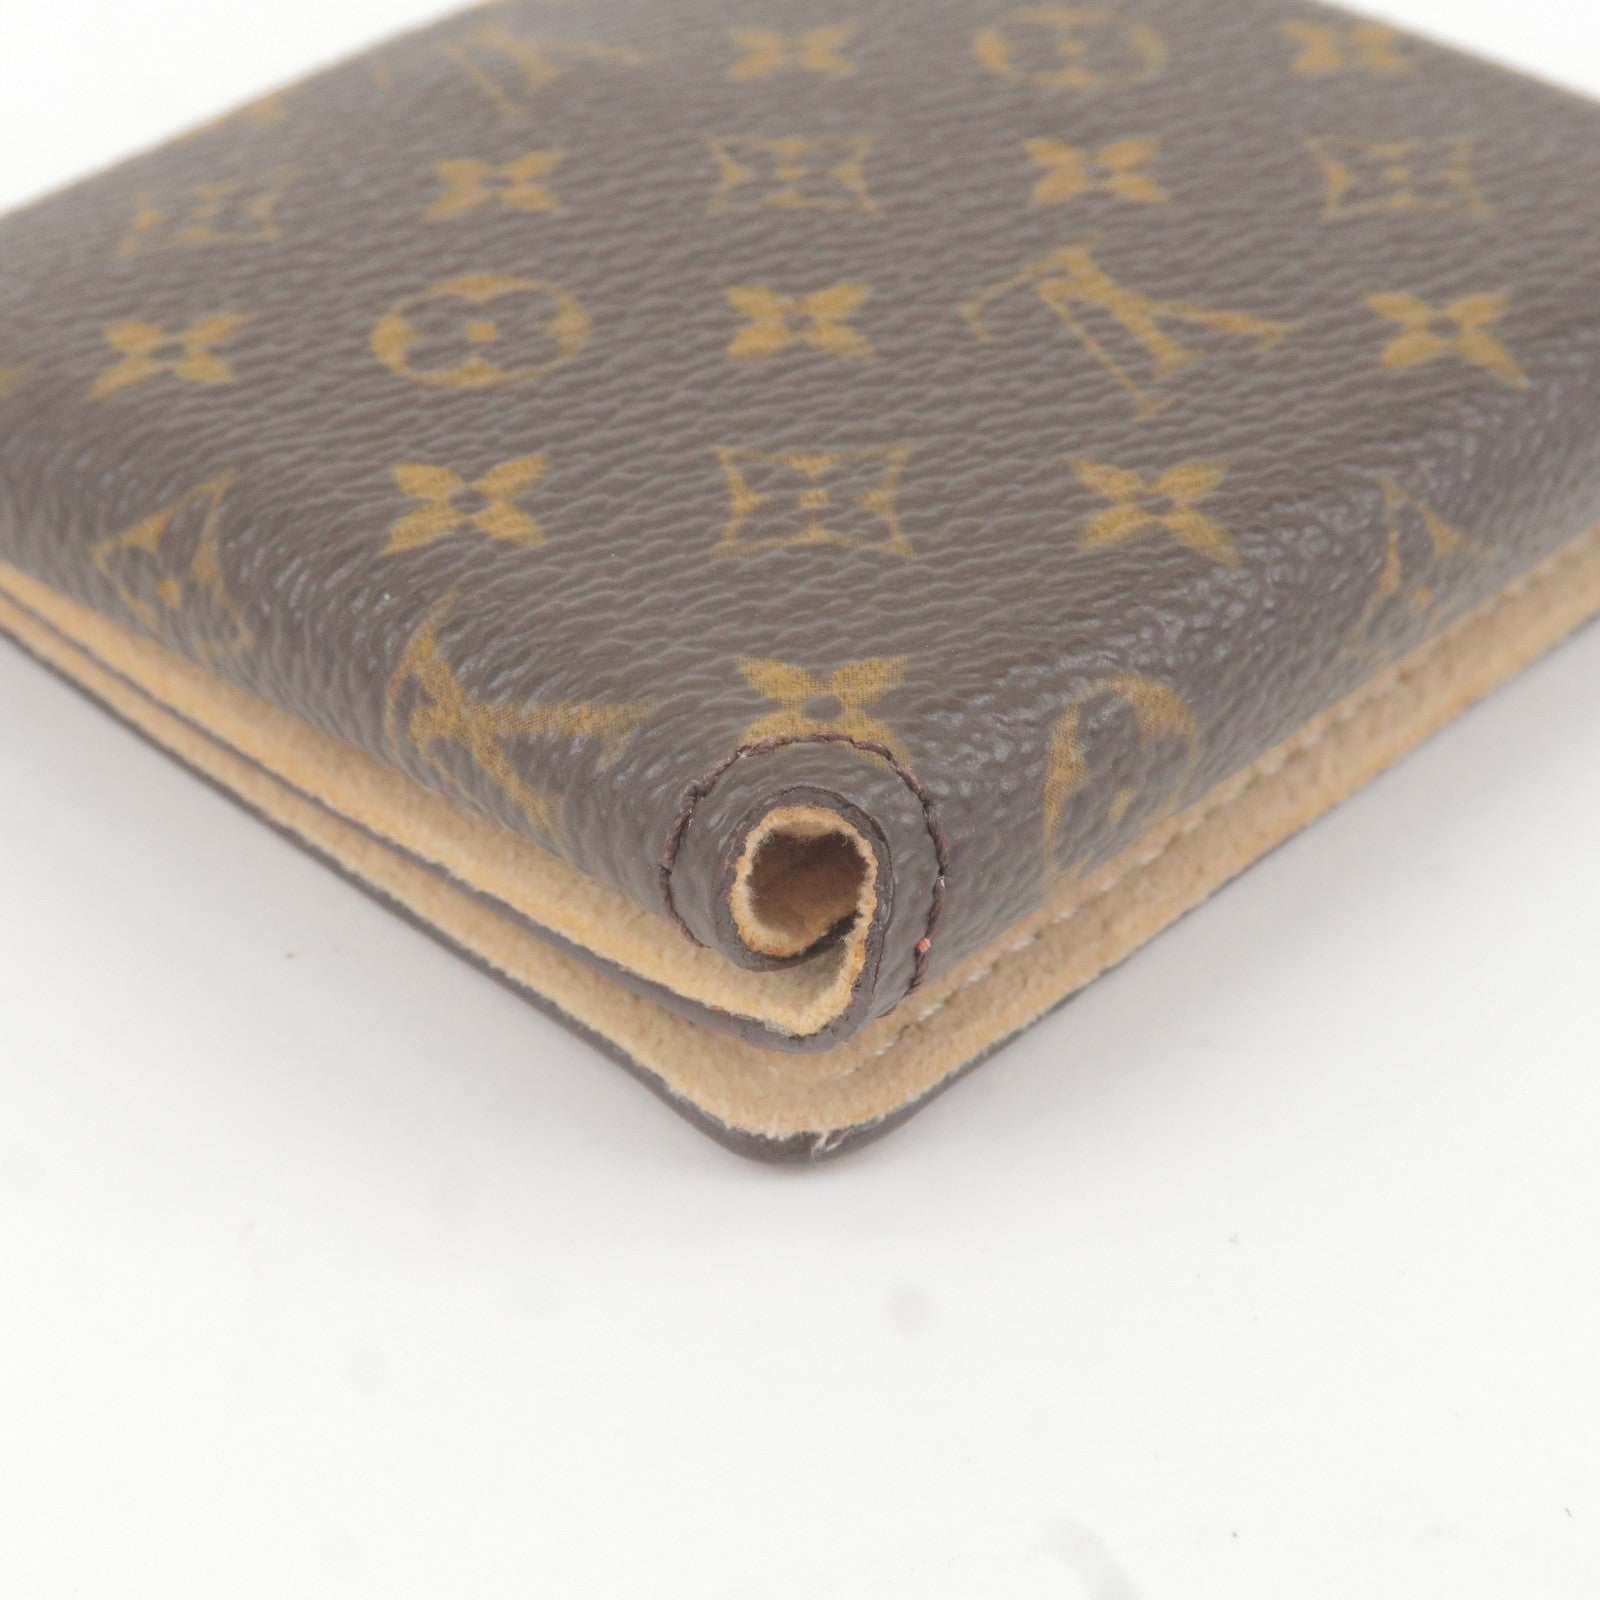 Louis-Vuitton-Monogram-Jewelry-Case-For-Ring-Brown – dct